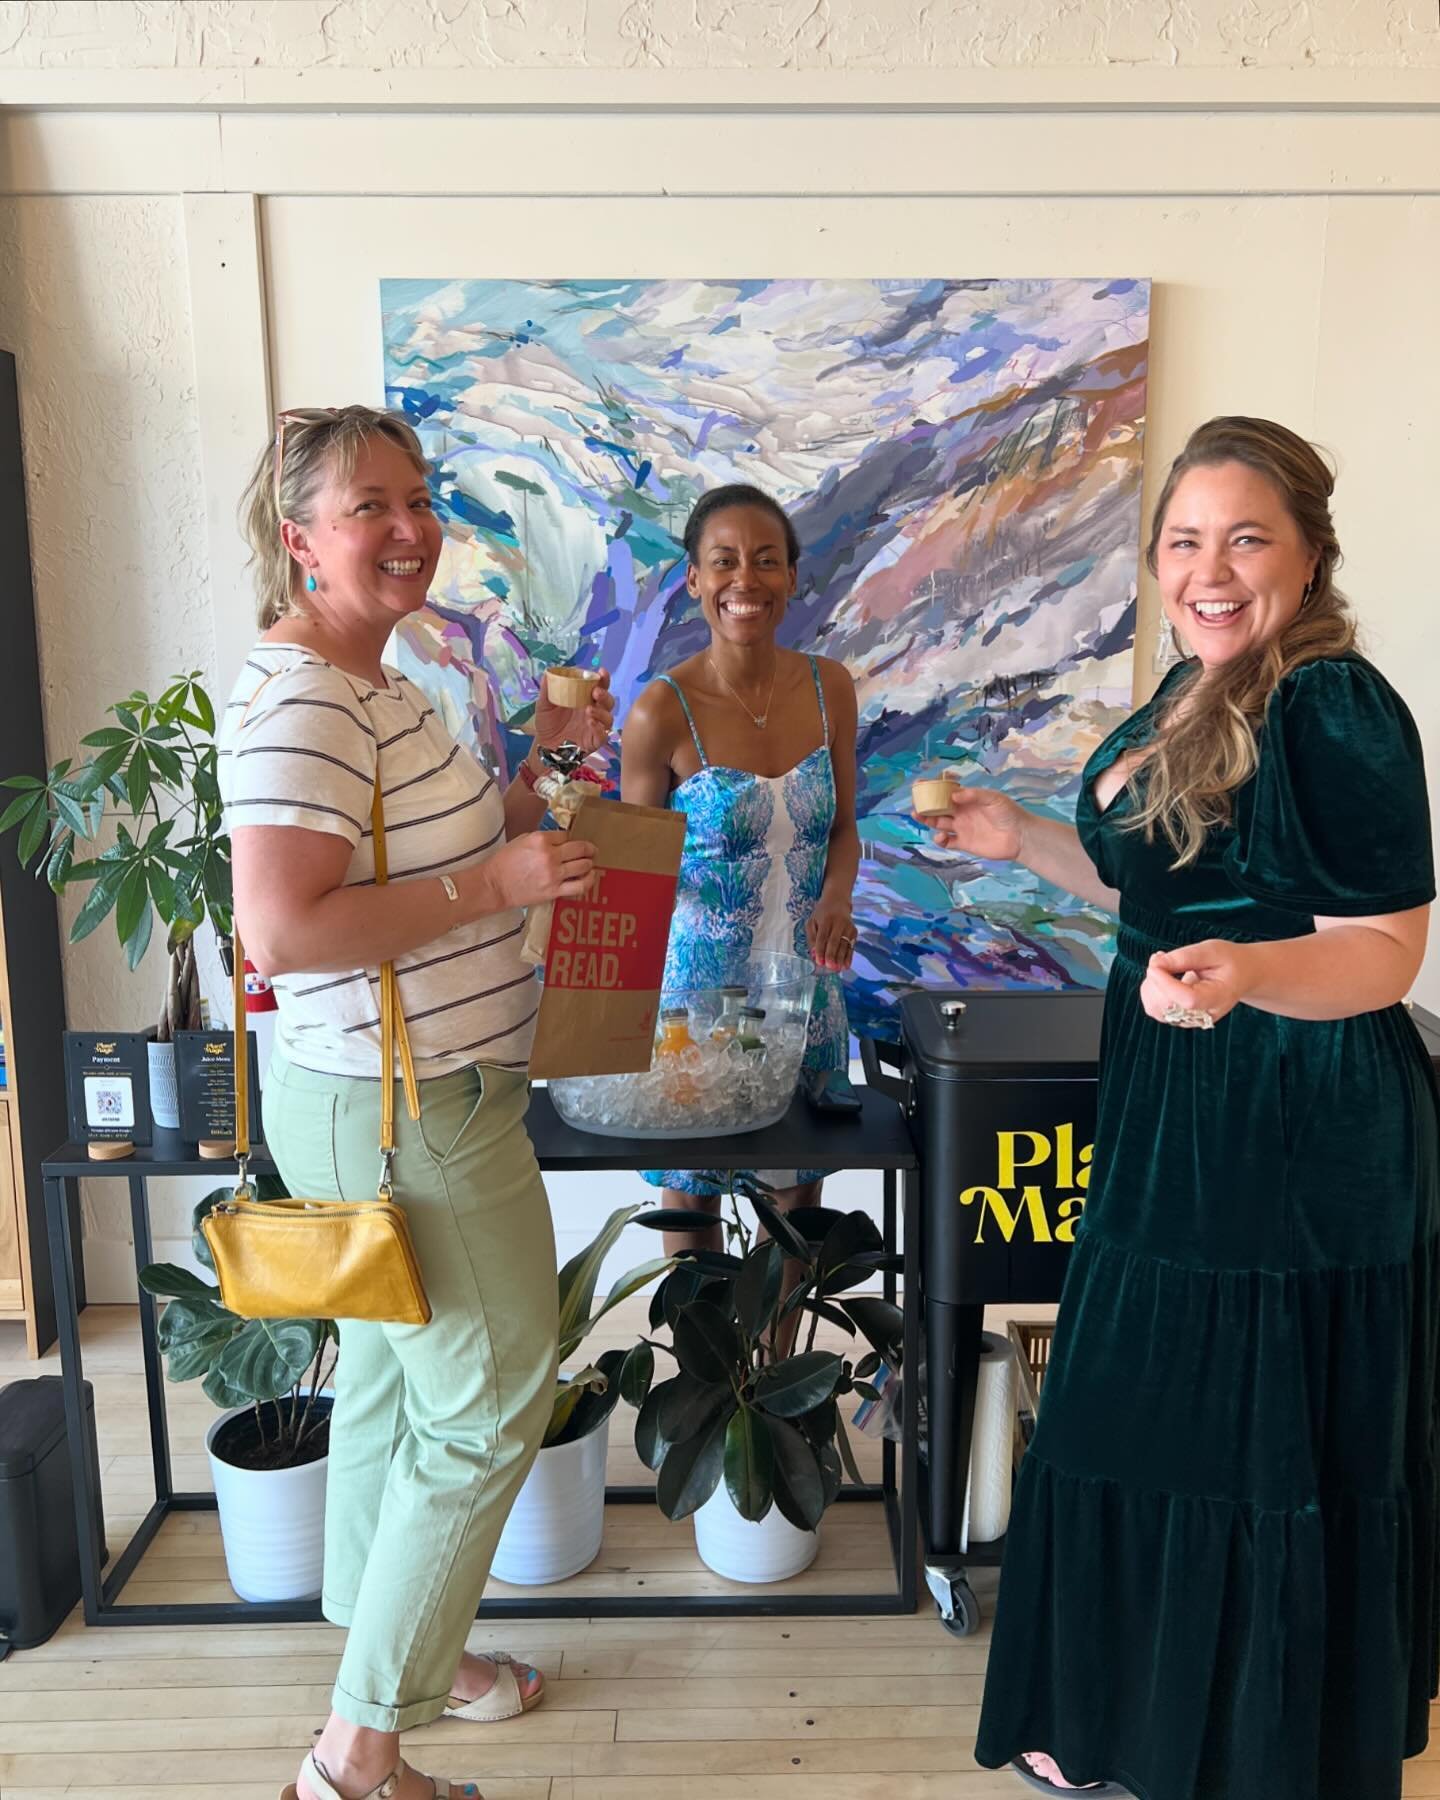 A heartfelt thank you to Mary (@59601mary) and Helena Home Team (@helenahometeam) for giving us the opportunity to pop up as part of the art walk.

The atmosphere was welcoming and brought together an amazing group of people. It was an honor to share